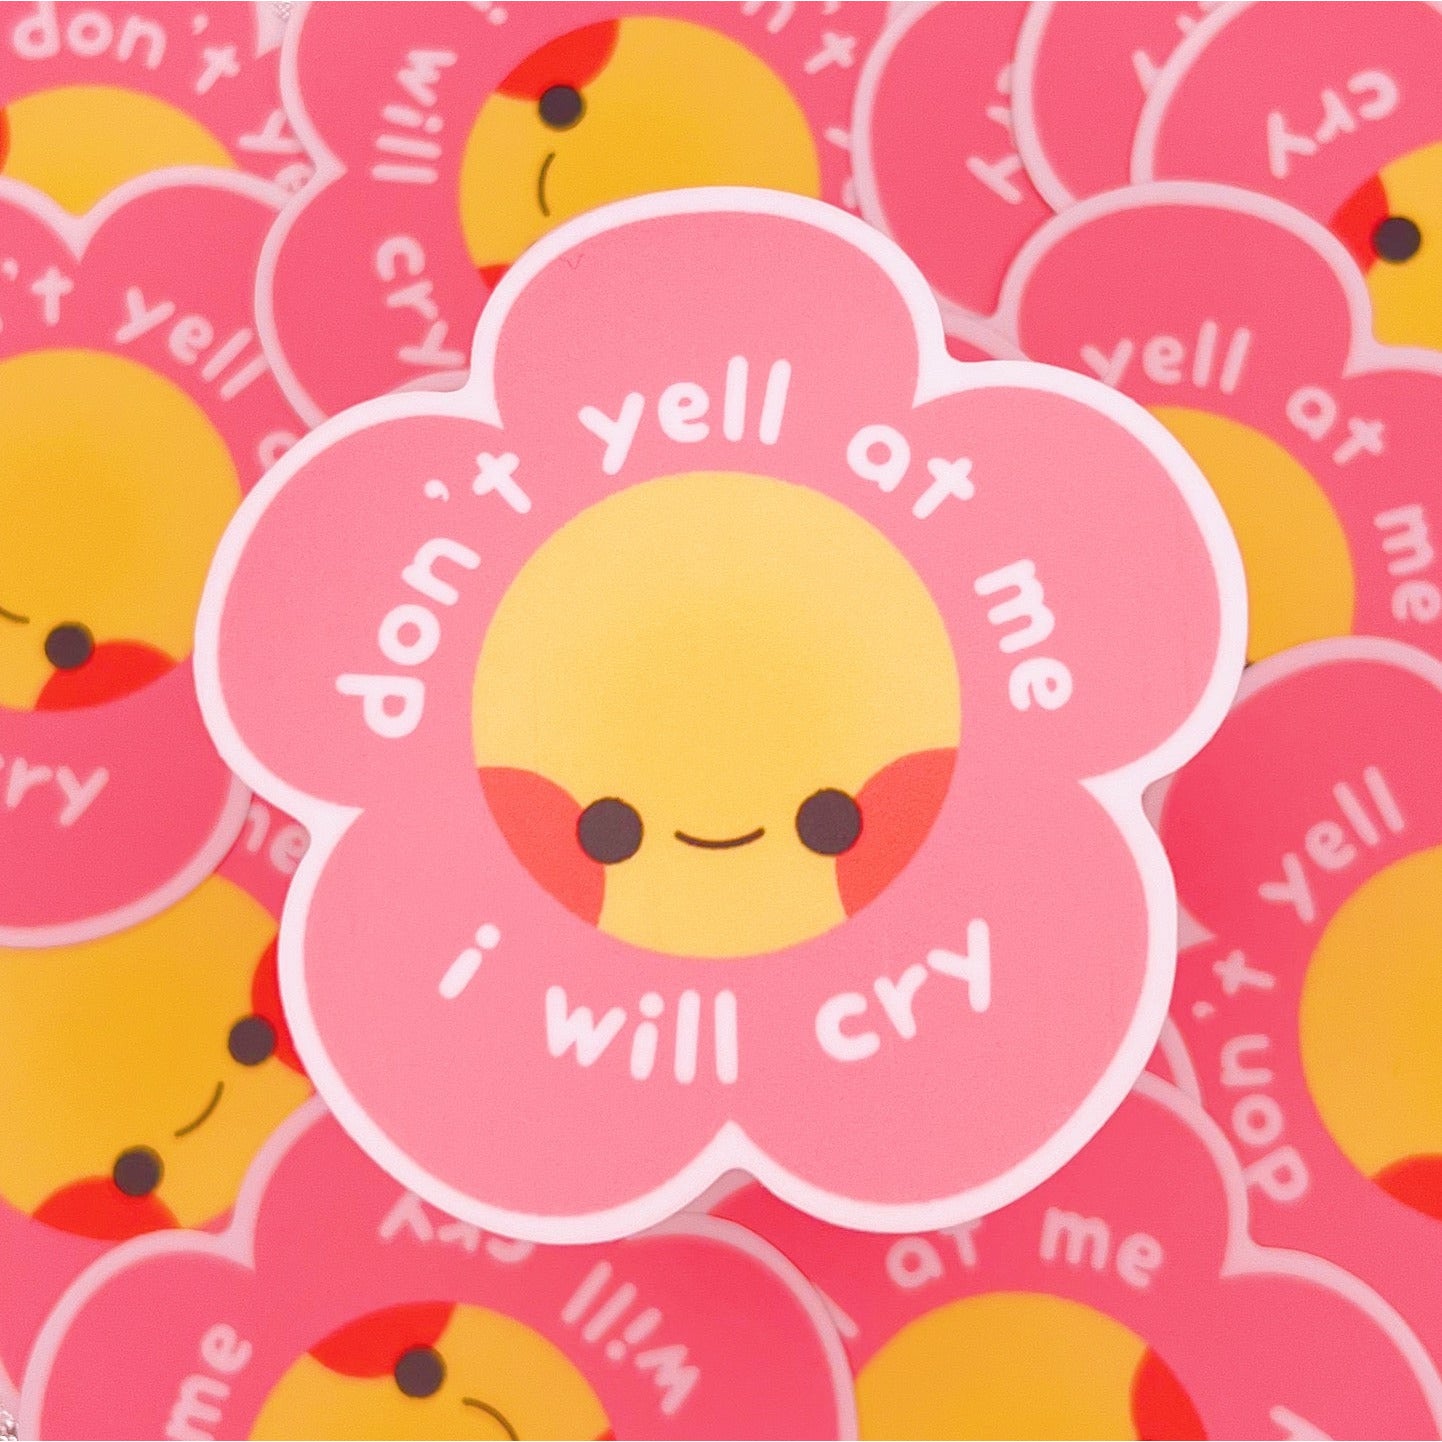 Don’t Yell At Me Sticker